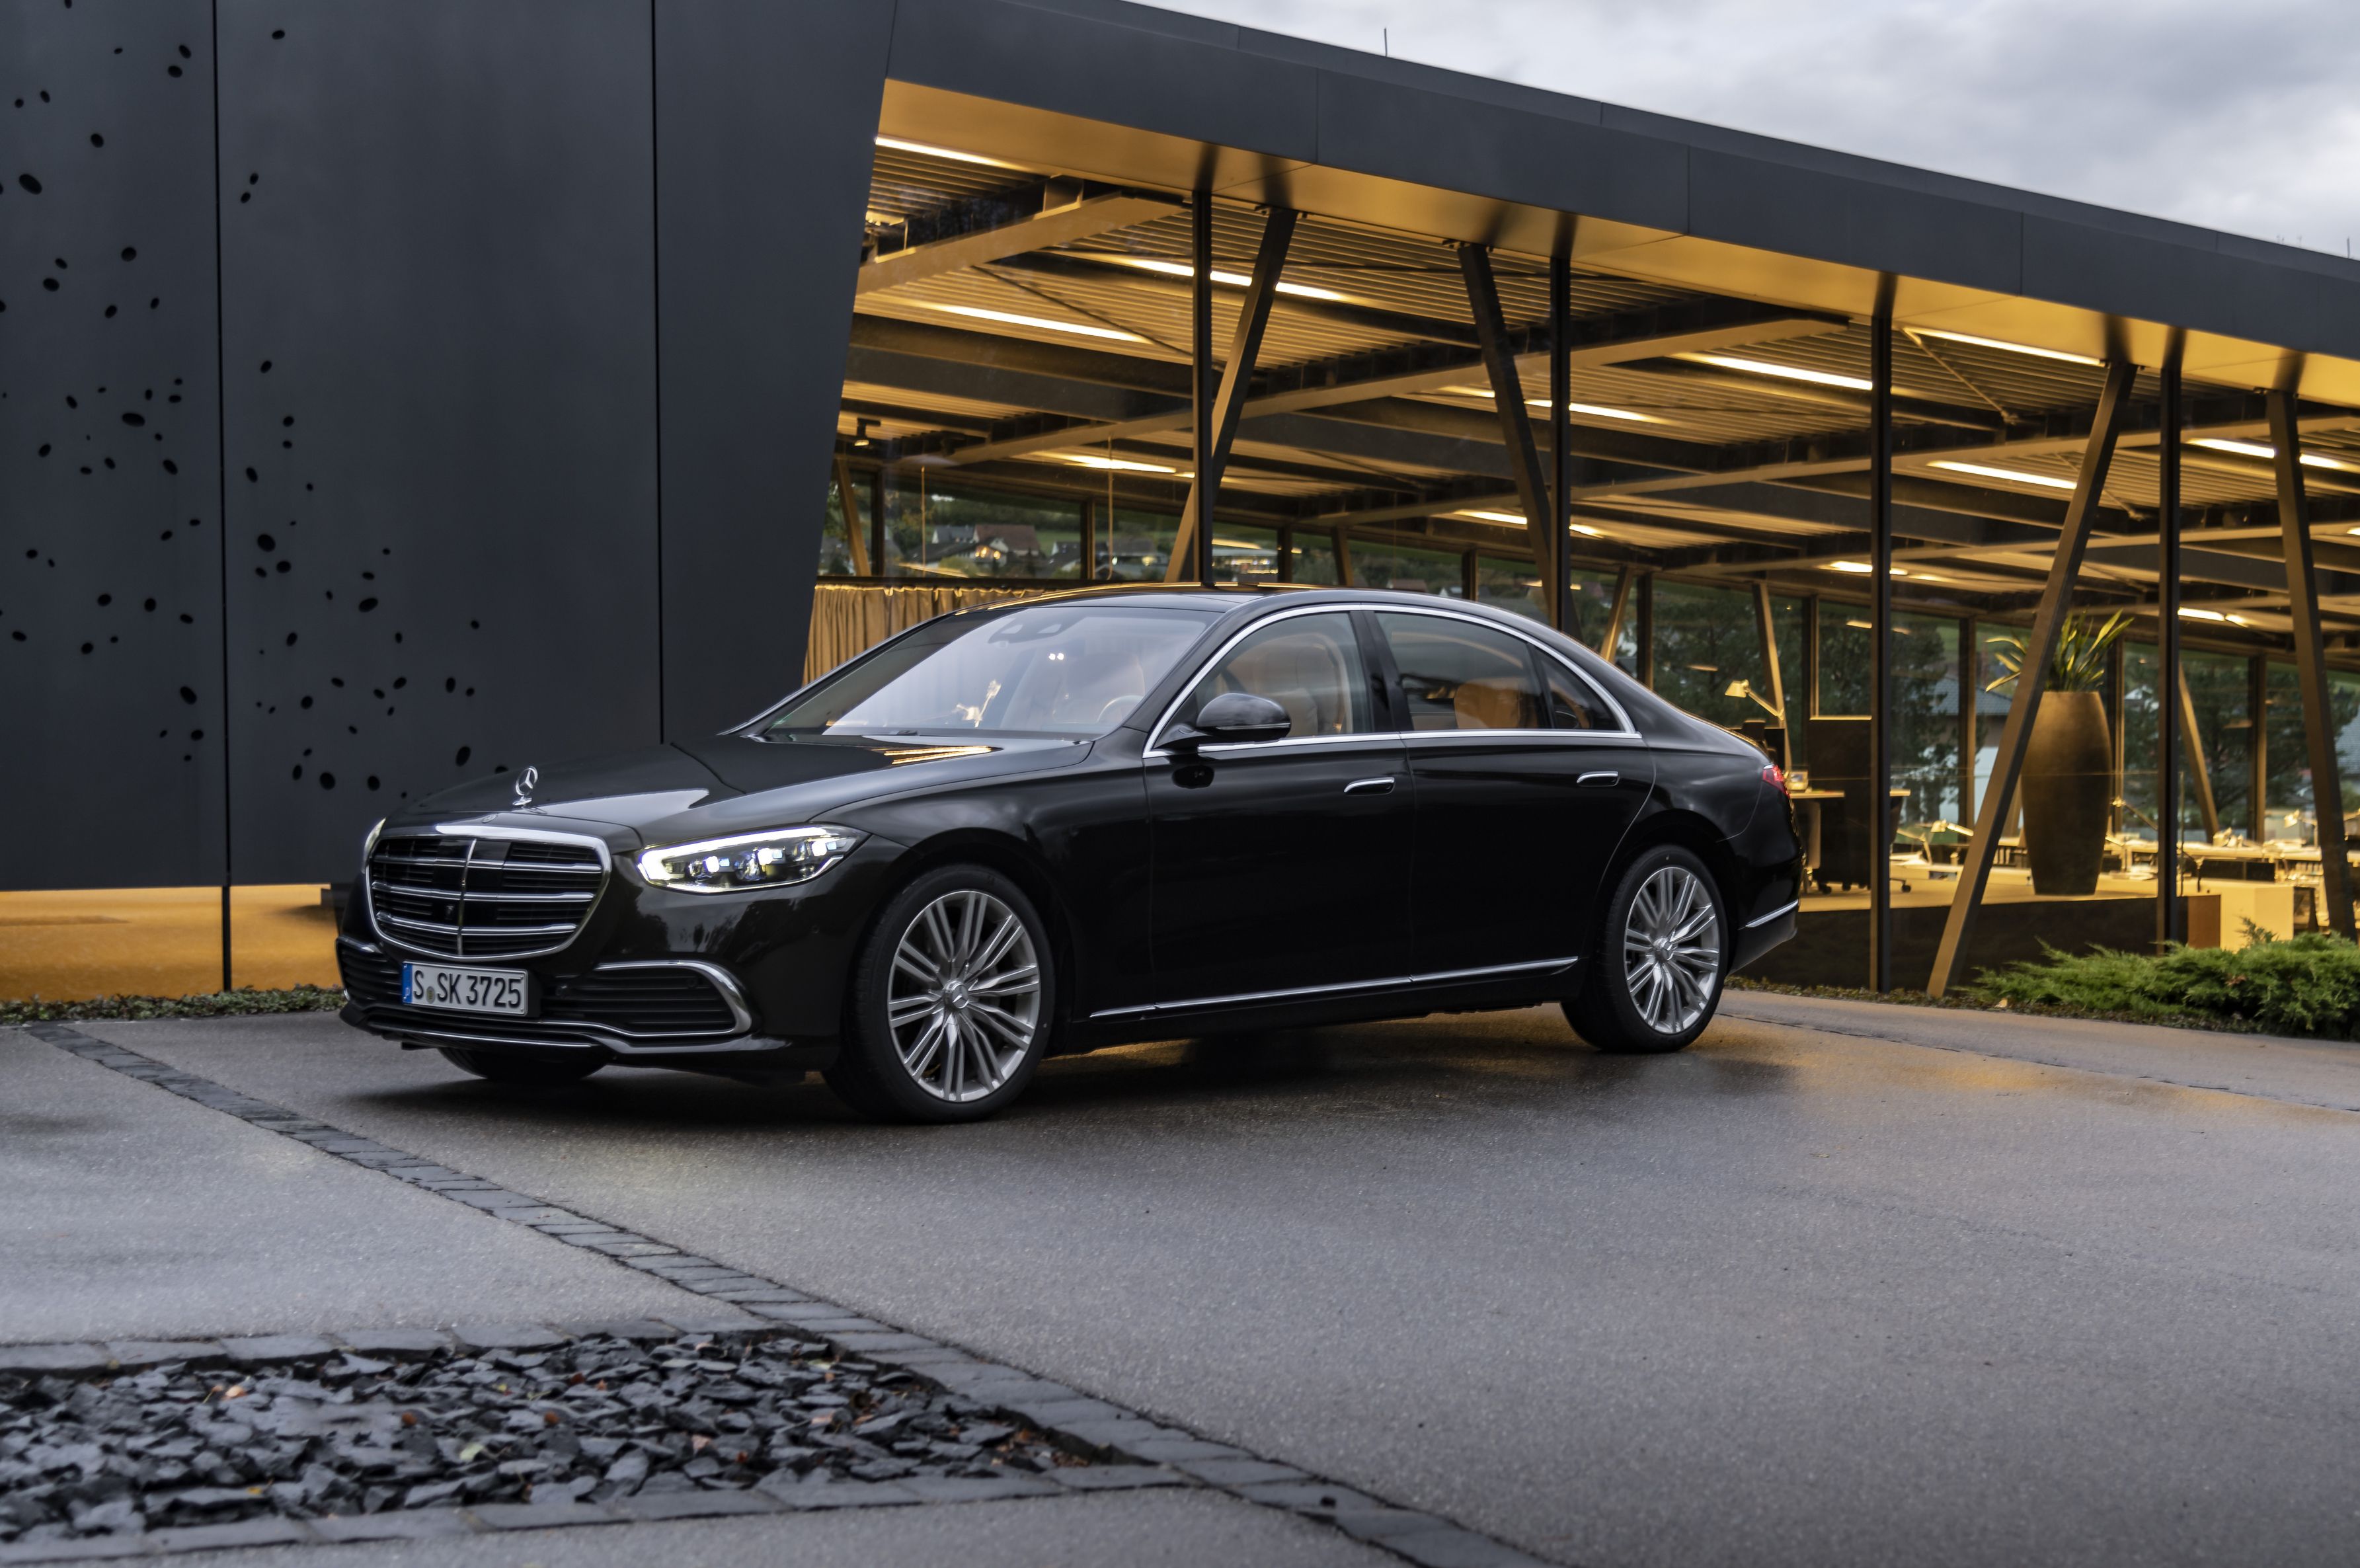 The 21 Mercedes Benz S Class Starts At 110 850